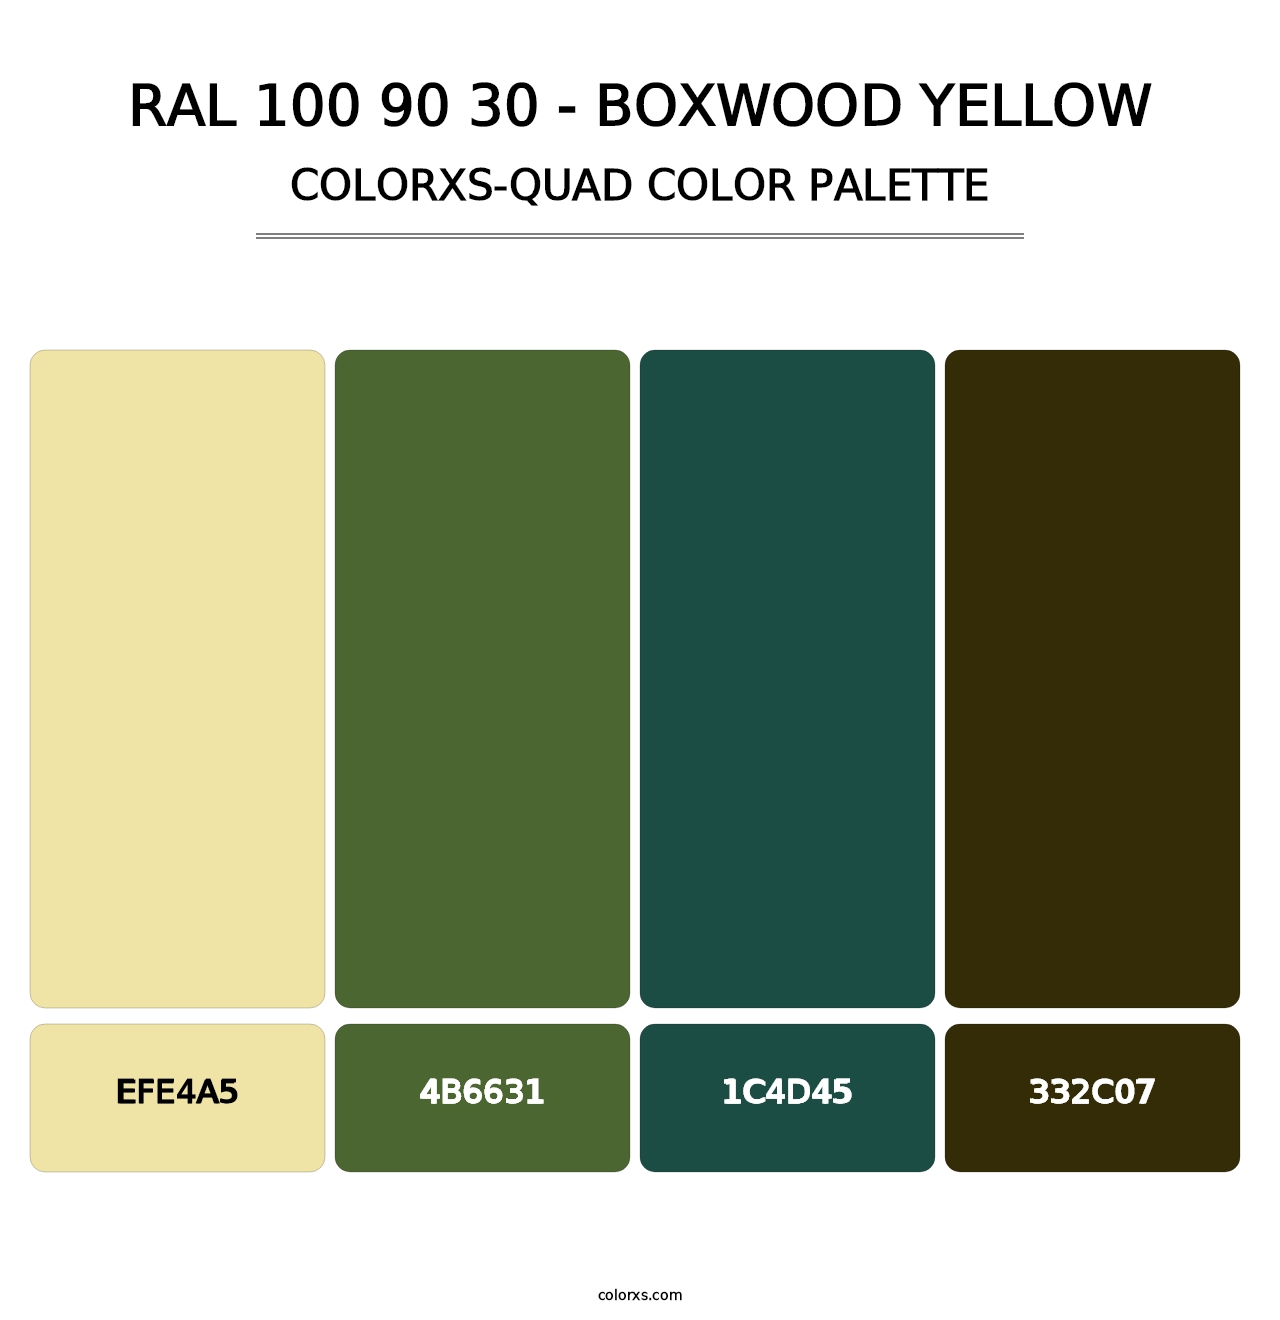 RAL 100 90 30 - Boxwood Yellow - Colorxs Quad Palette